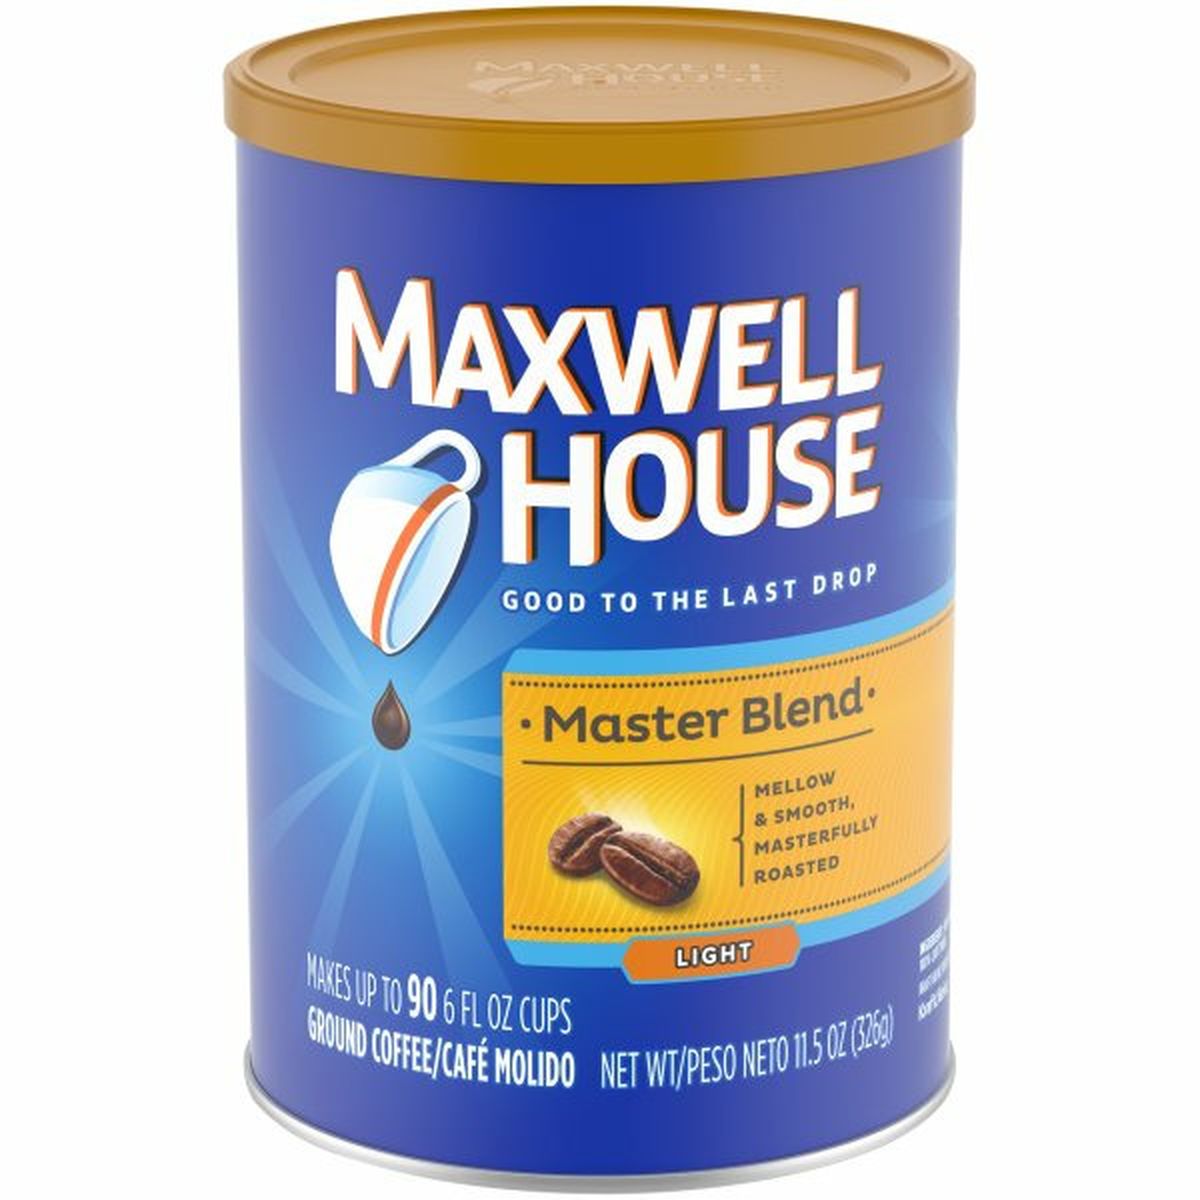 Calories in Maxwell House Master Blend Ground Coffee